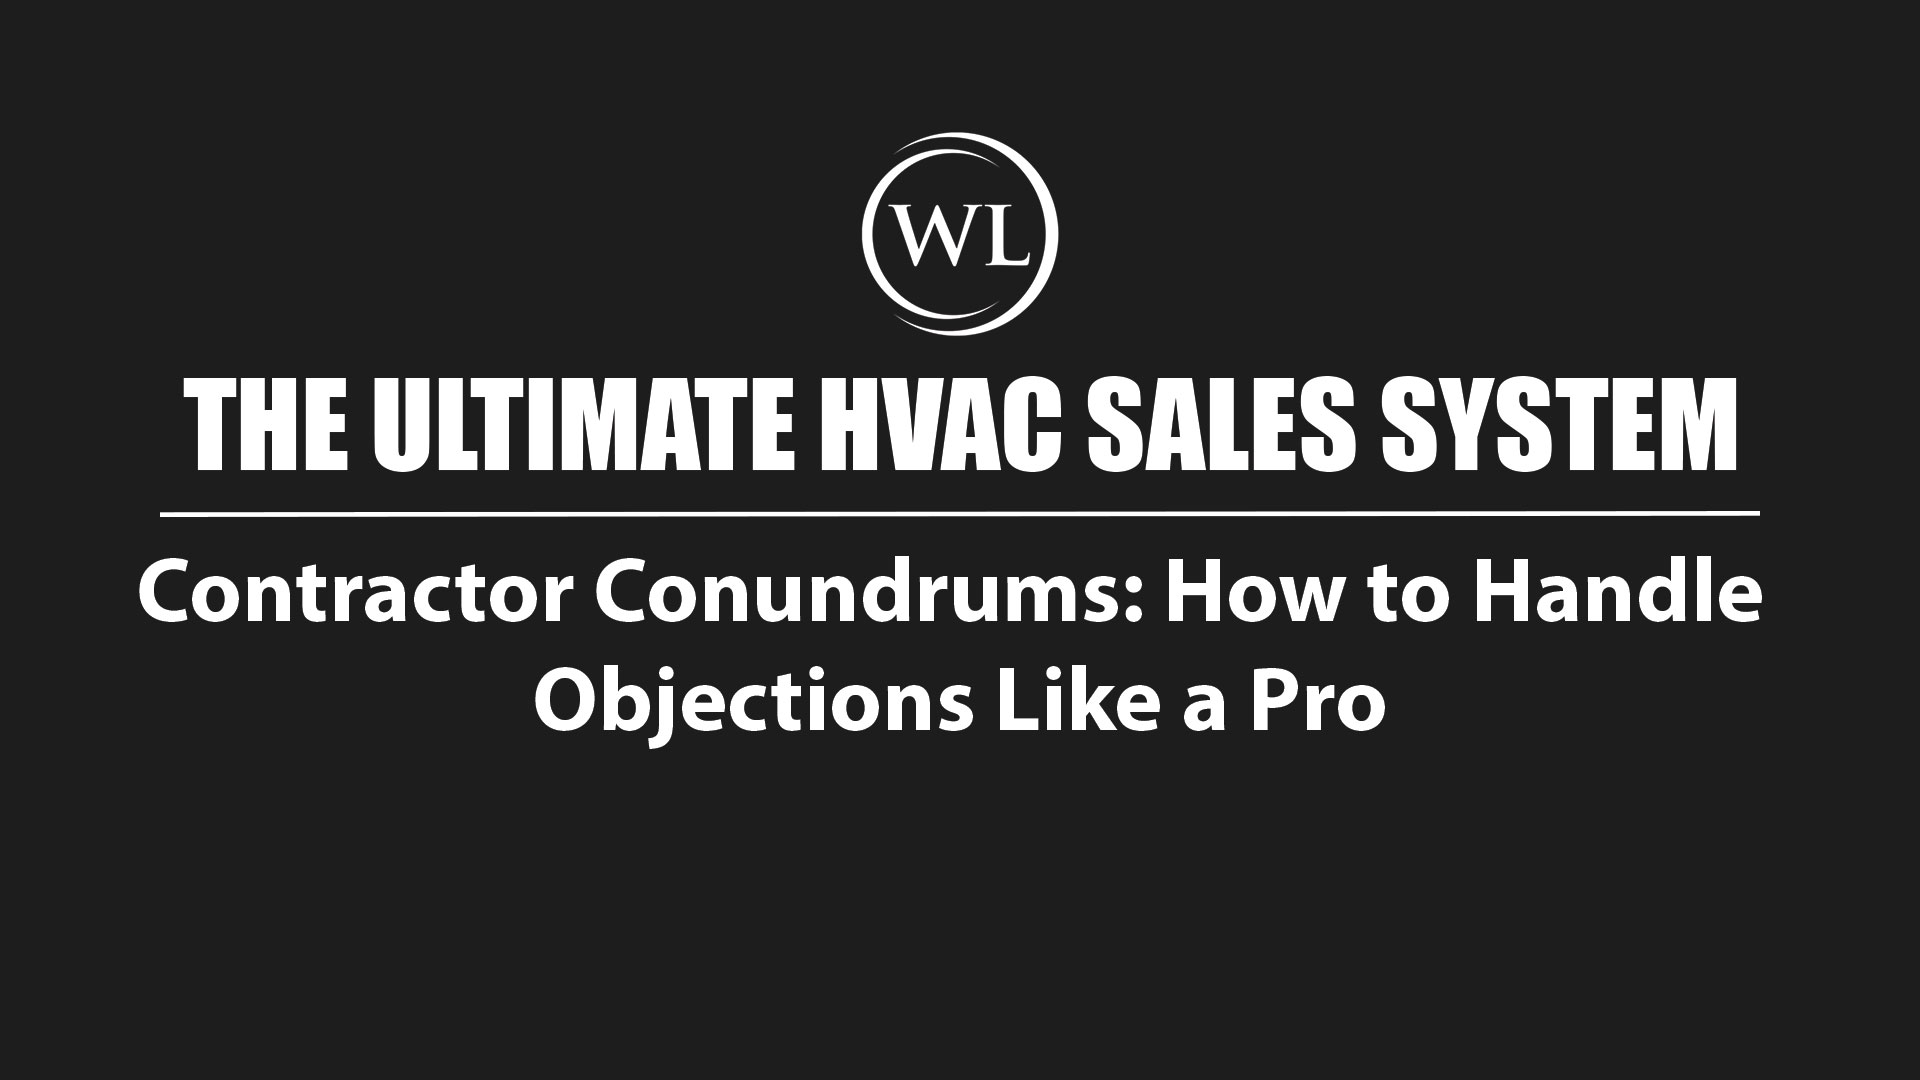 Contractor Conundrums: How to Handle Objections Like a Pro